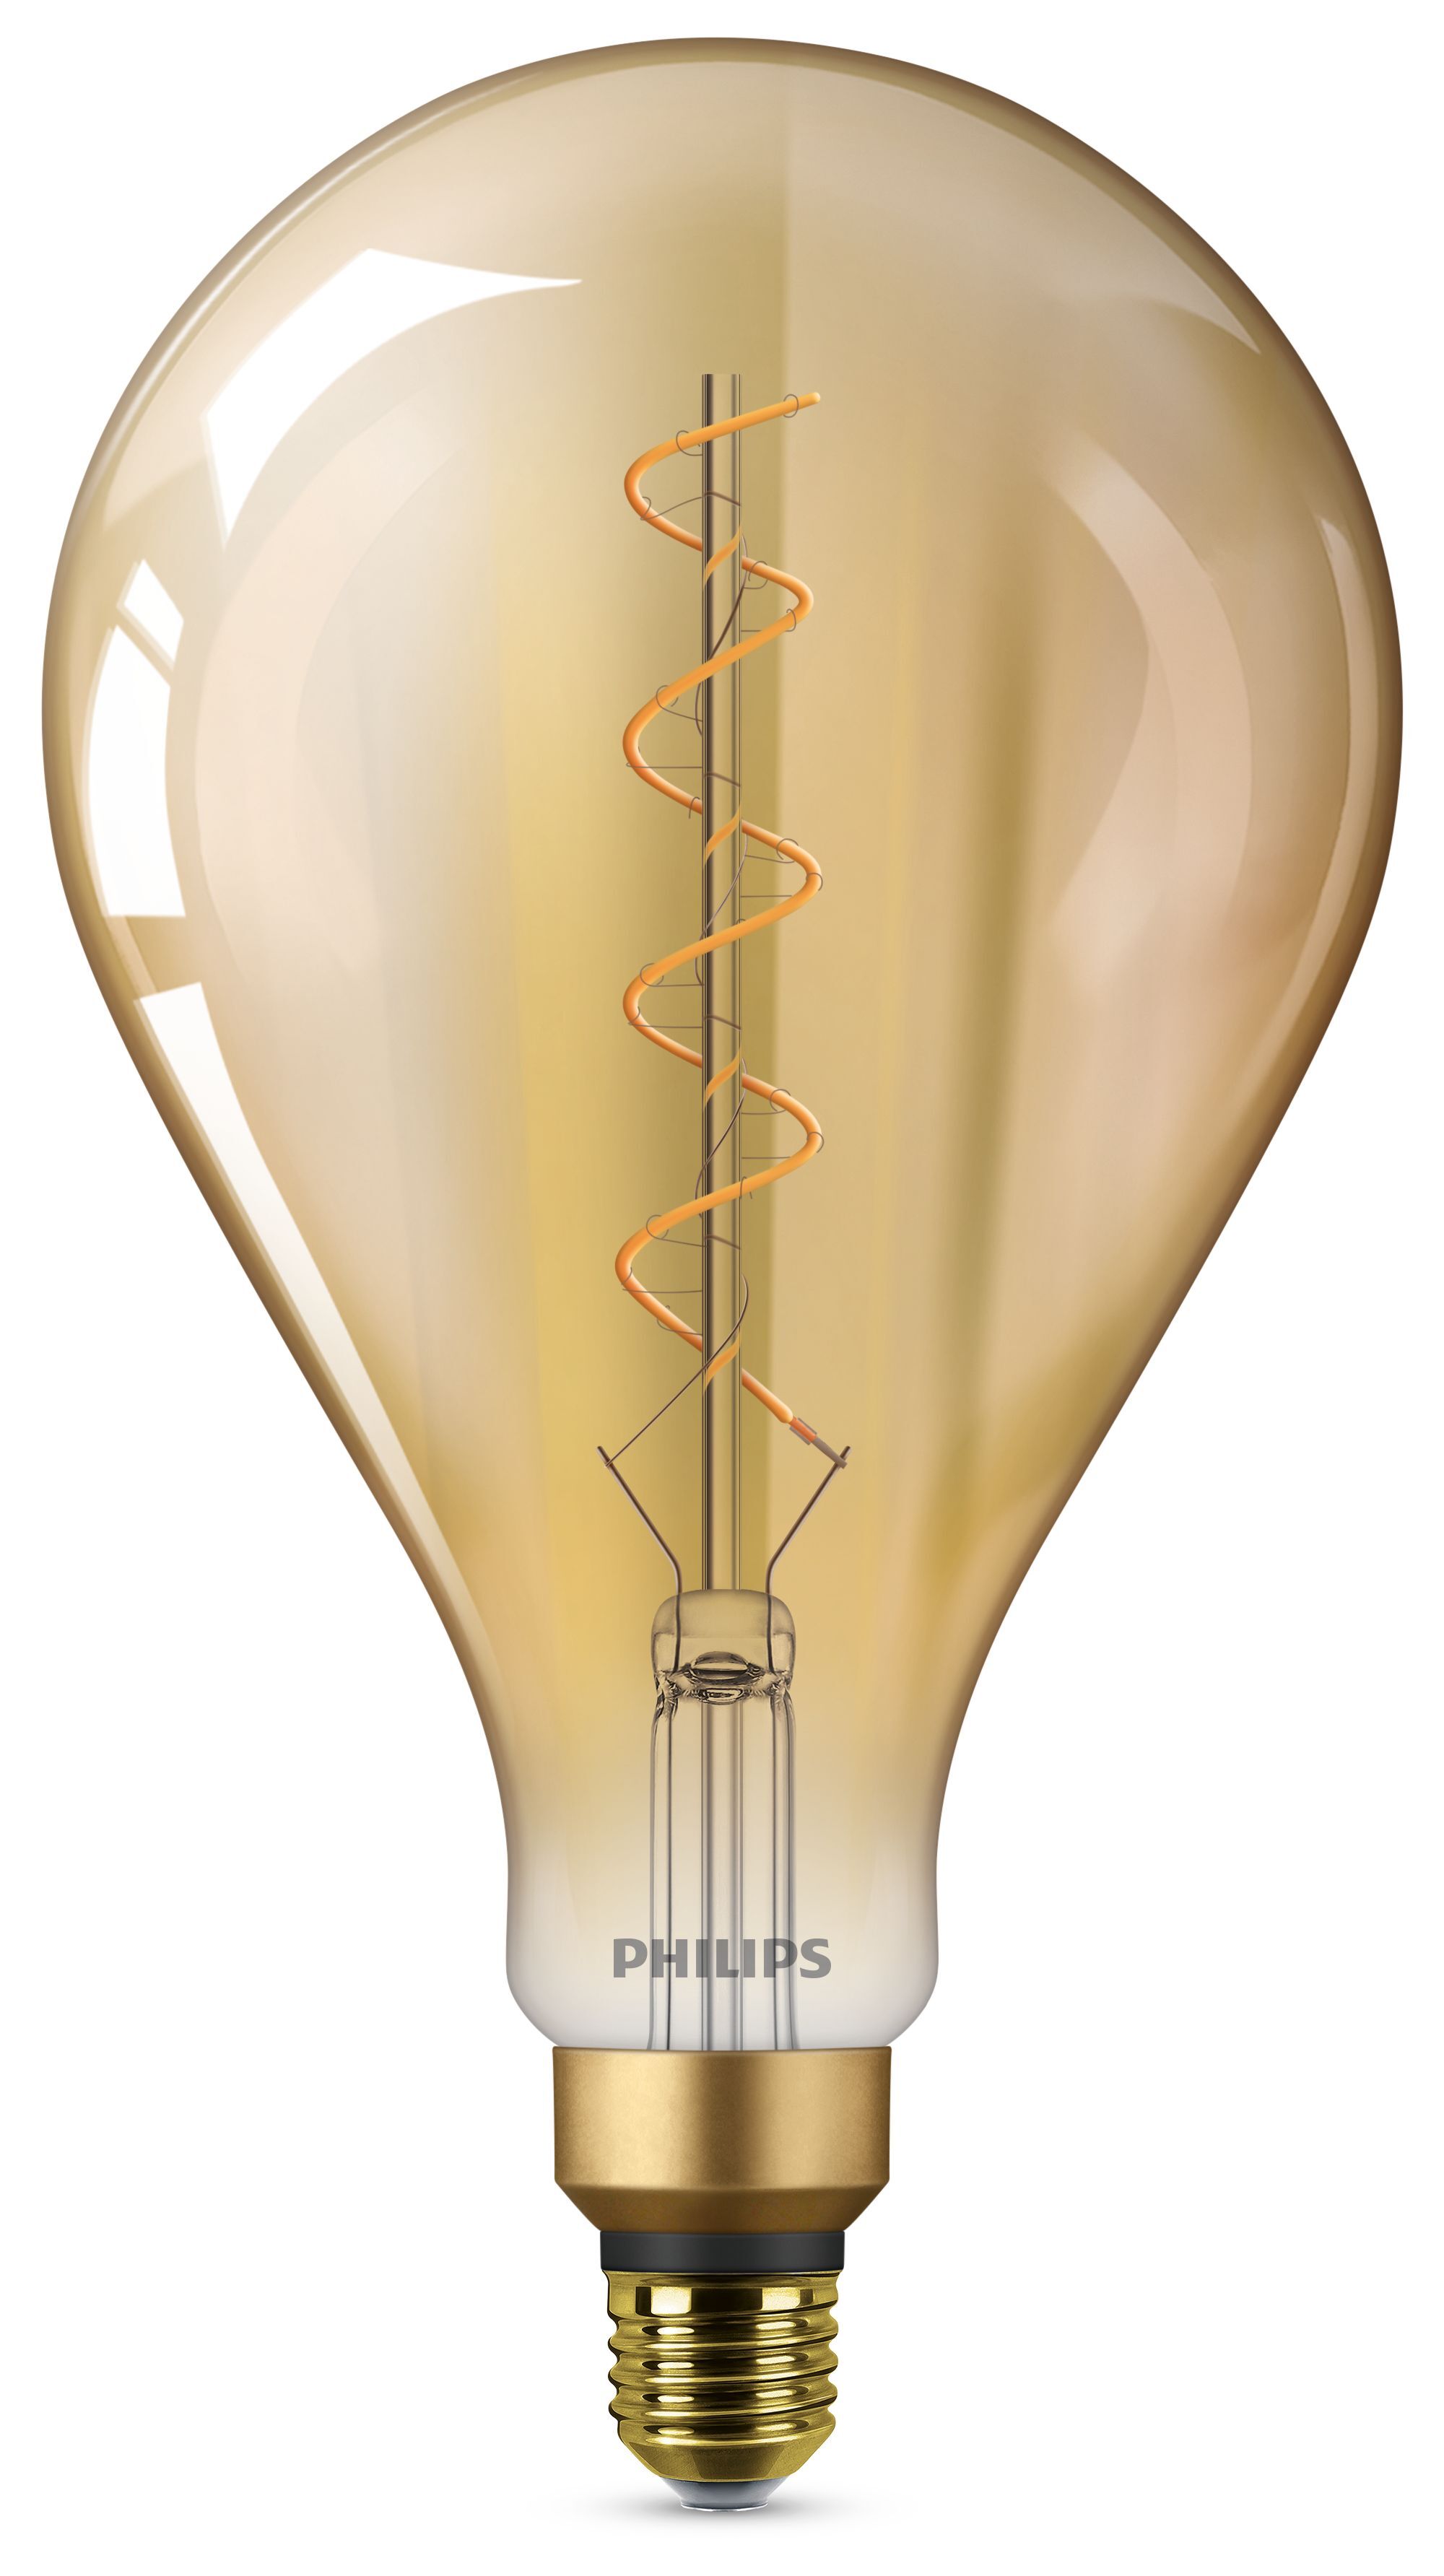 Philips 5W (25W) E27 Flame Non-dimmable Bulb